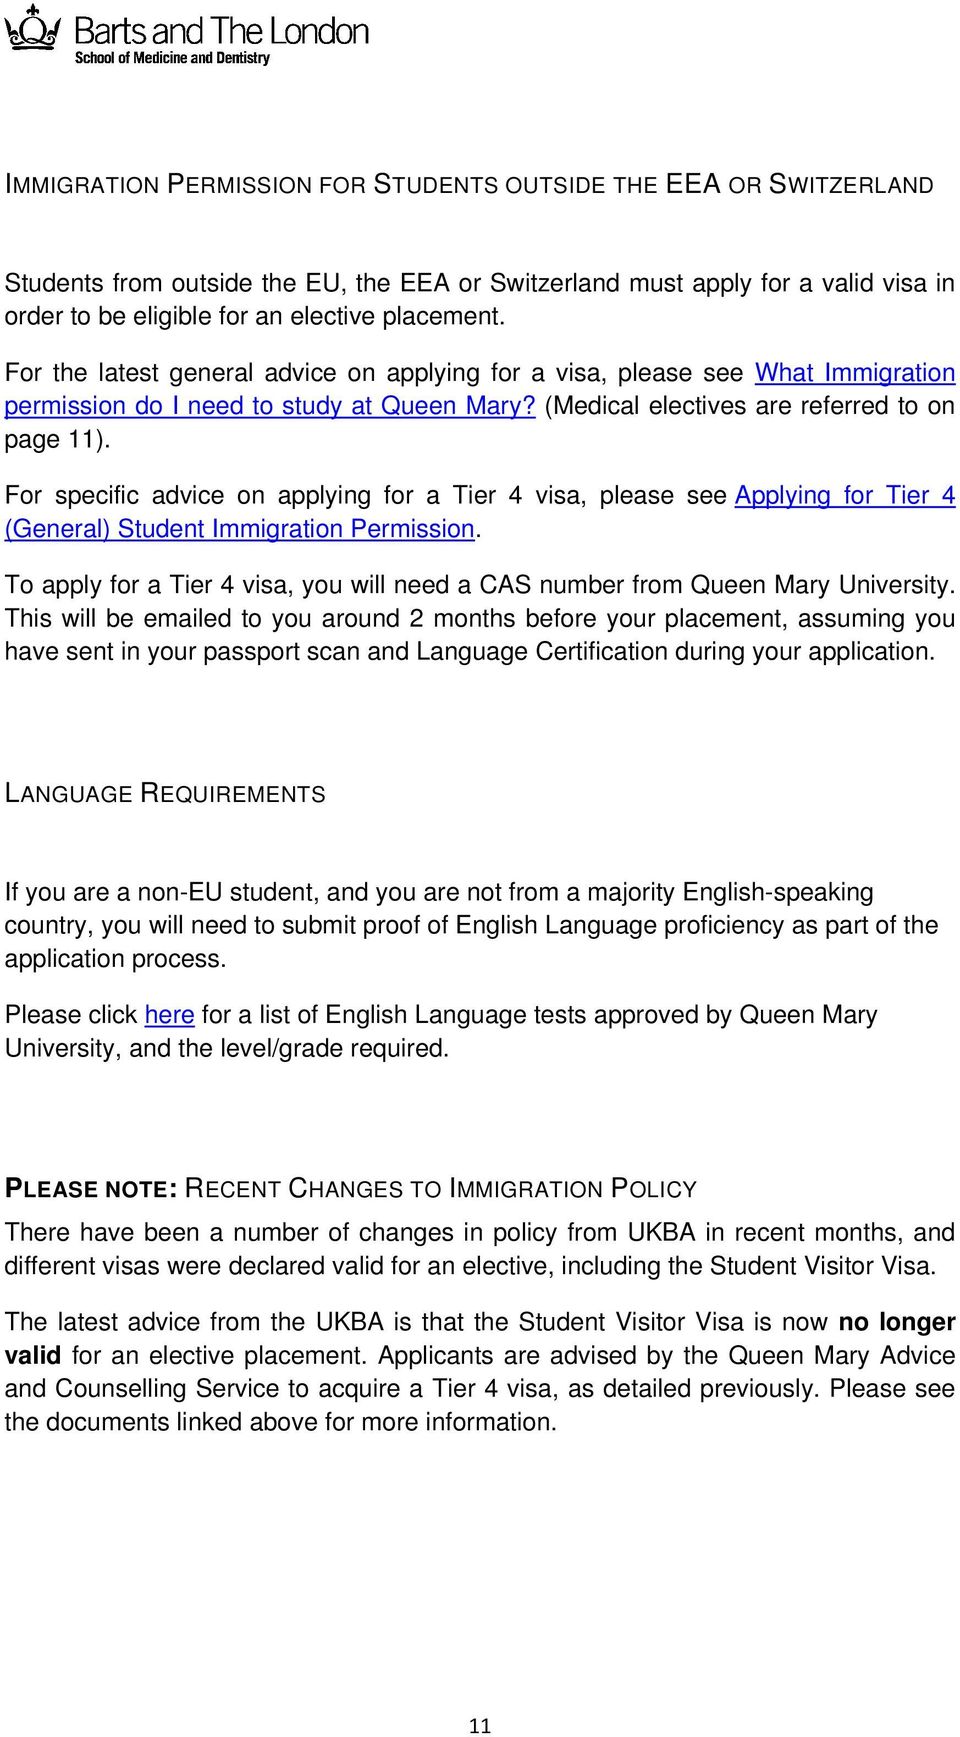 For specific advice on applying for a Tier 4 visa, please see Applying for Tier 4 (General) Student Immigration Permission.